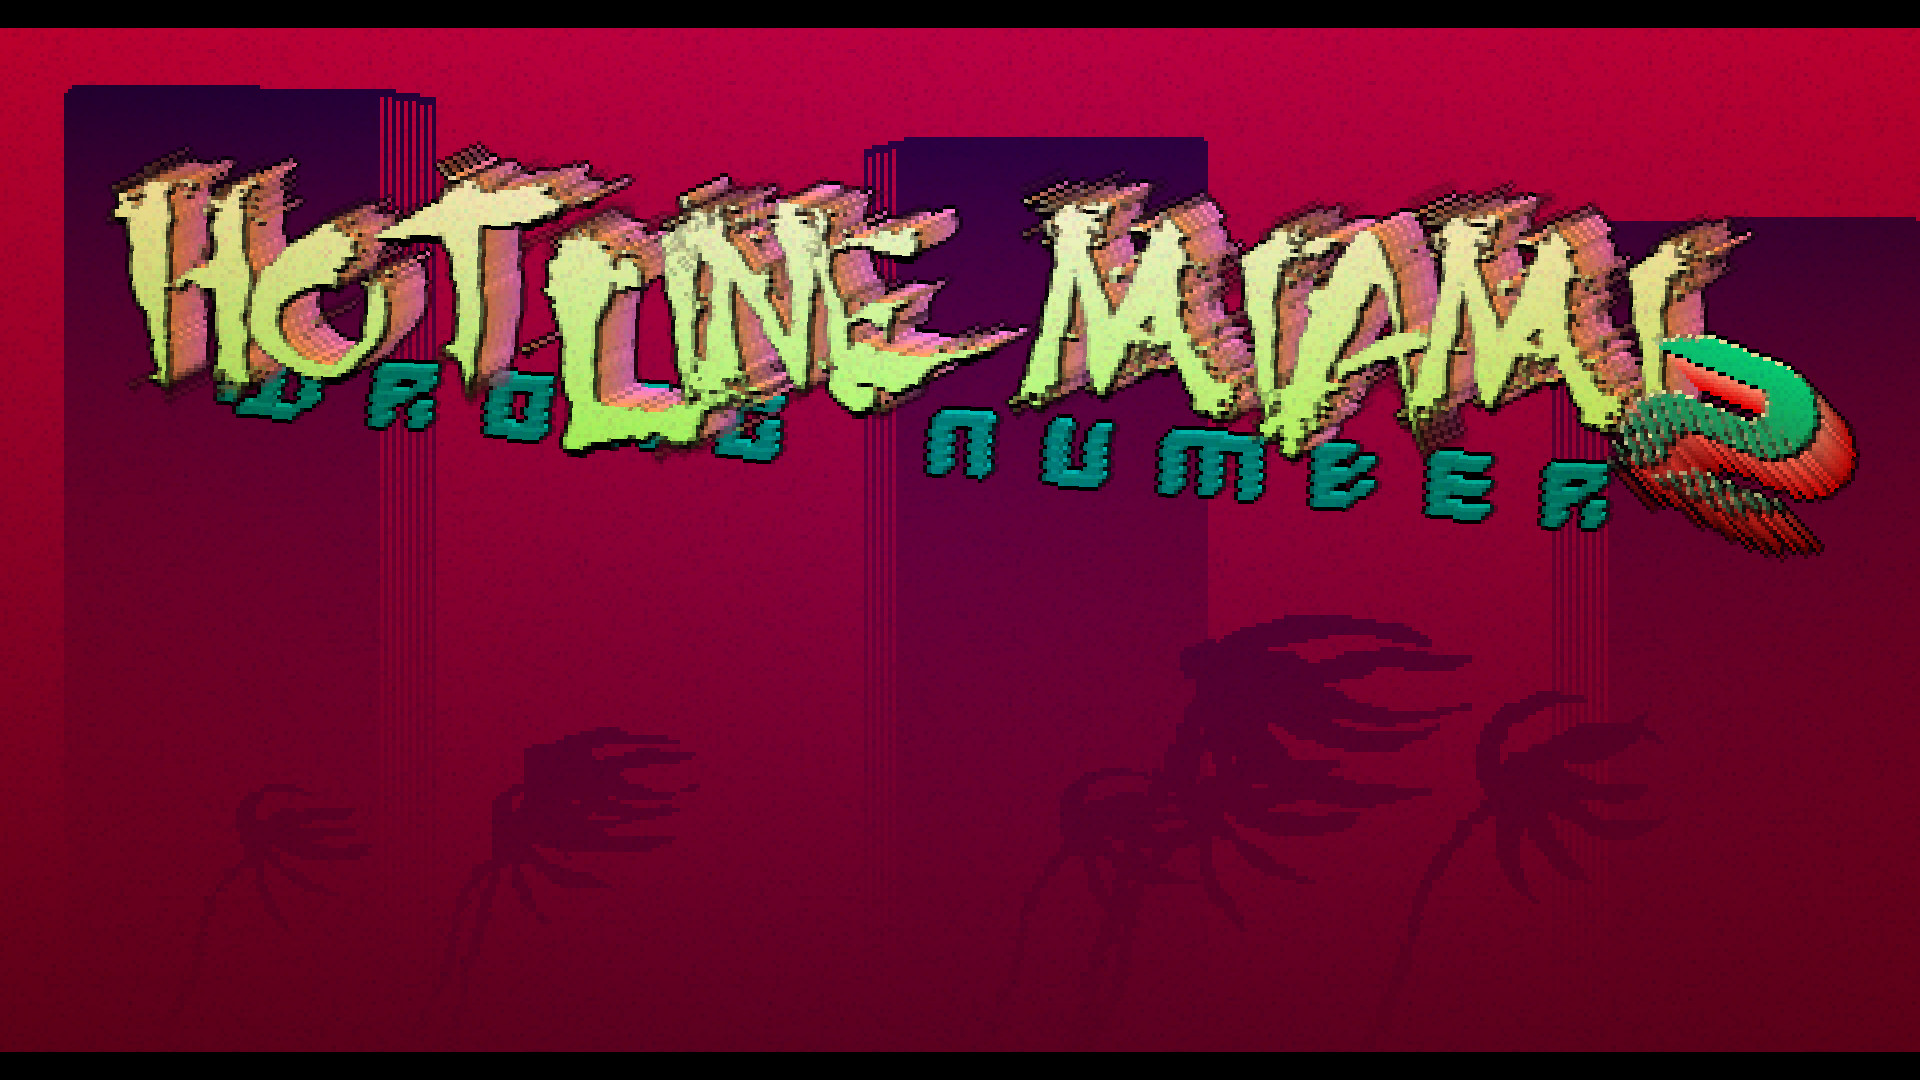 1920x1080 Hotline Miami 2 menu screen without the actual menu, just thought someone  might want to use it as a wallpaper.